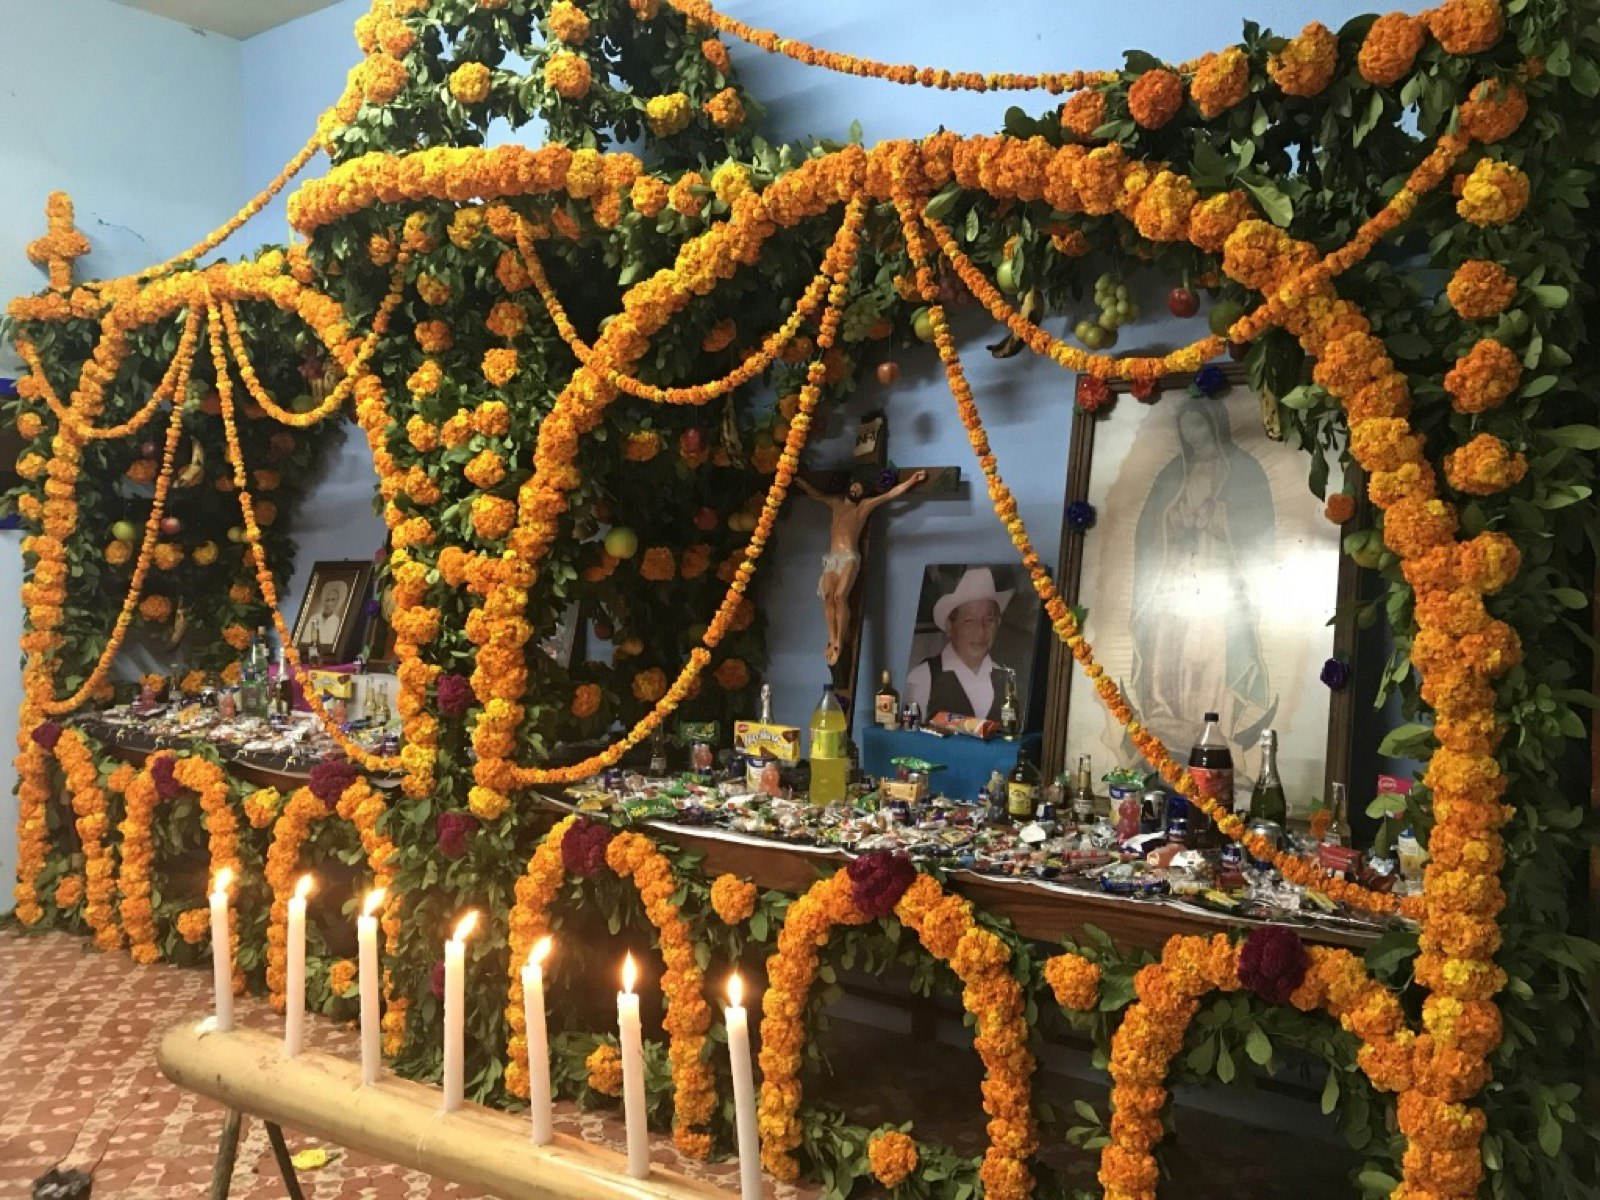 Strings of orange marigolds are draped over a wooden altar filled with photos and lighted candles; Xantolo